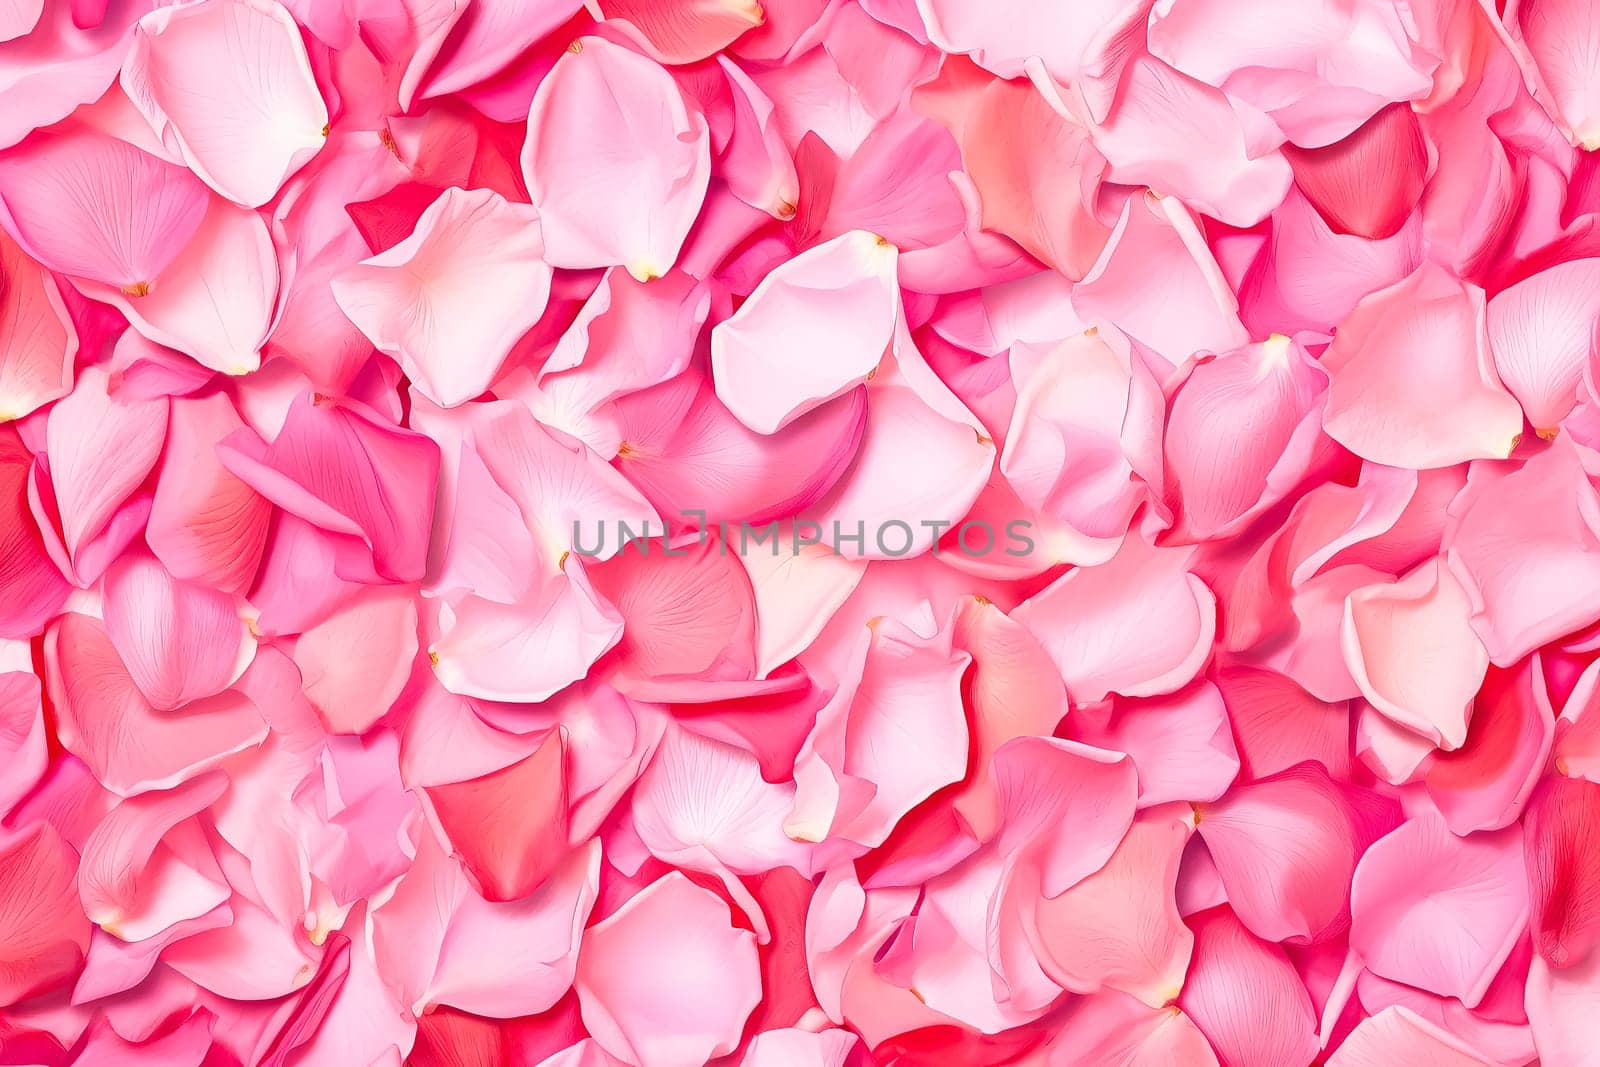 Capture the essence of romance with tender pink rose petals, providing the perfect backdrop for expressing love on Valentines Day. Ample space for your heartfelt text.